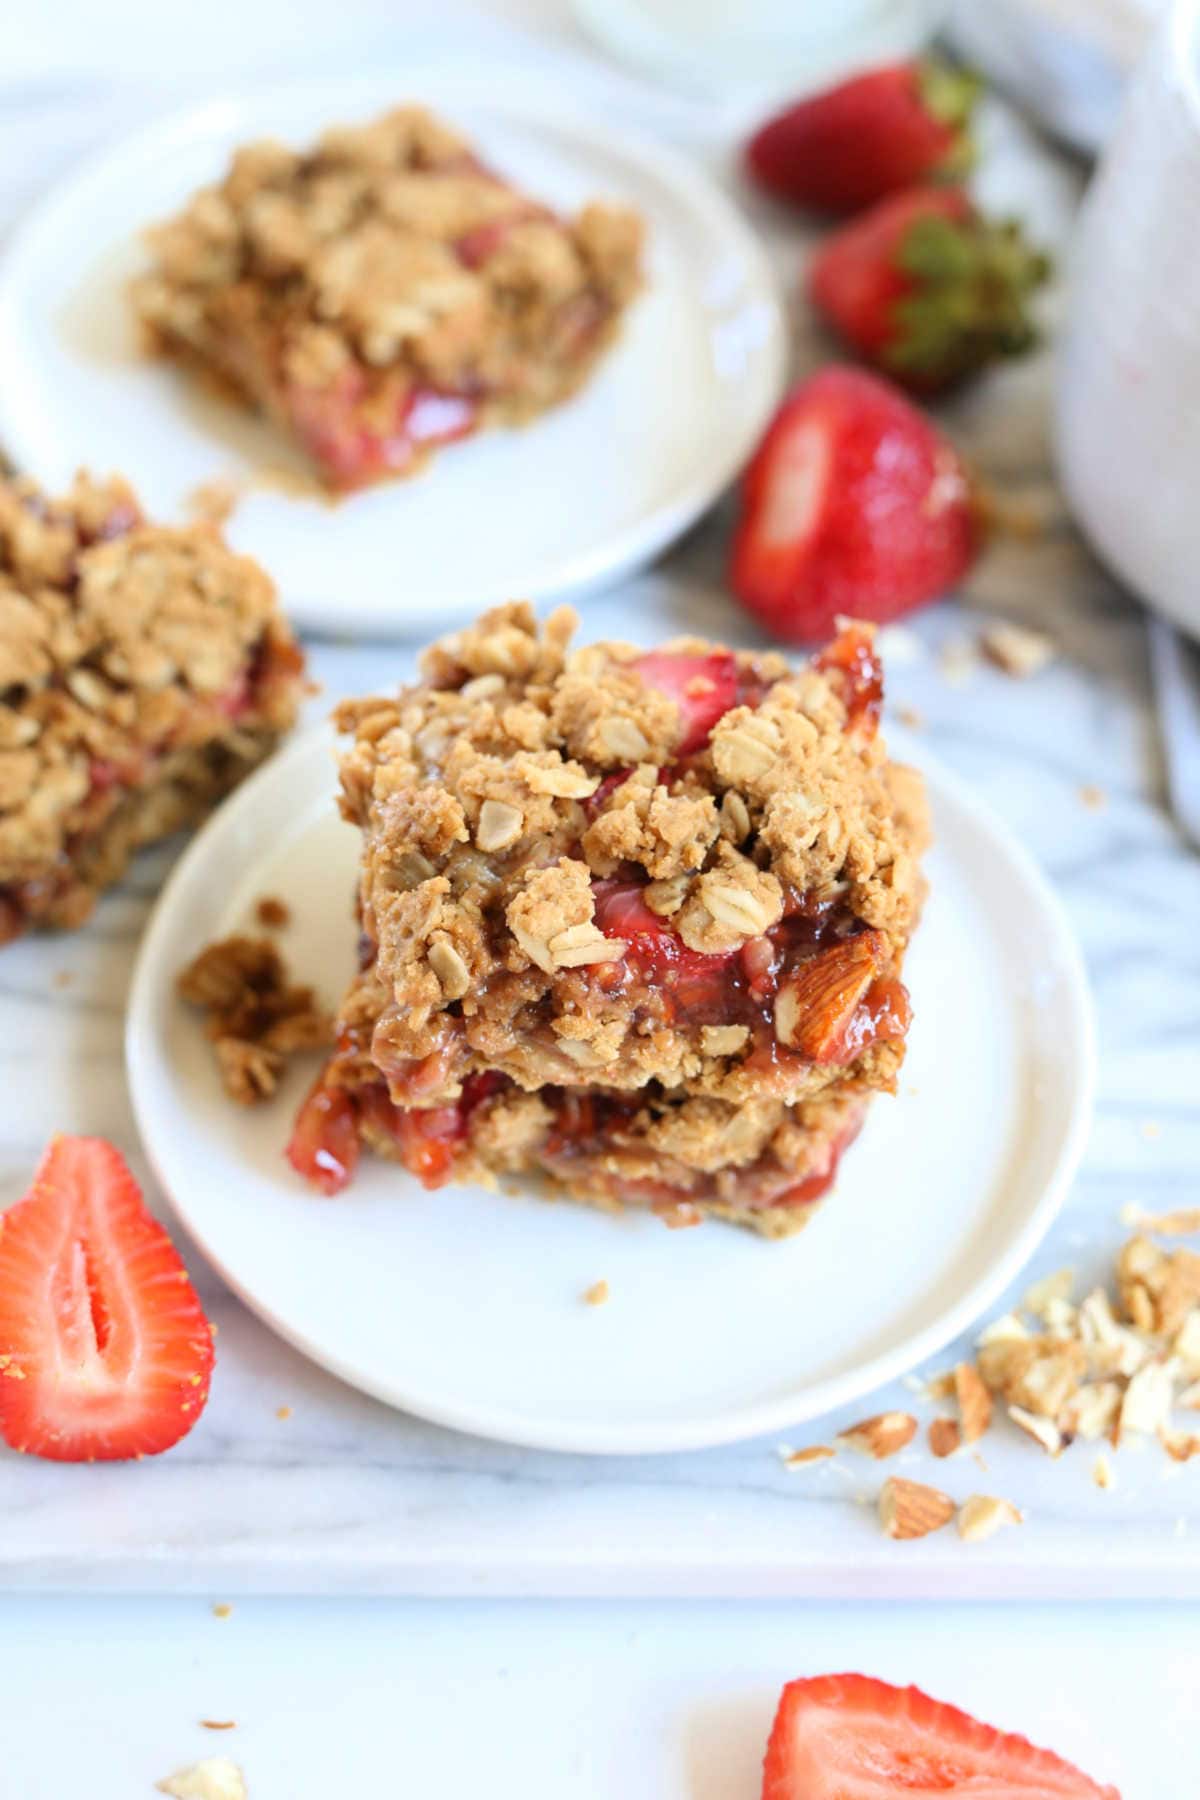 gluten-free crumble bars made with strawberry jam and fresh strawberries on a plate